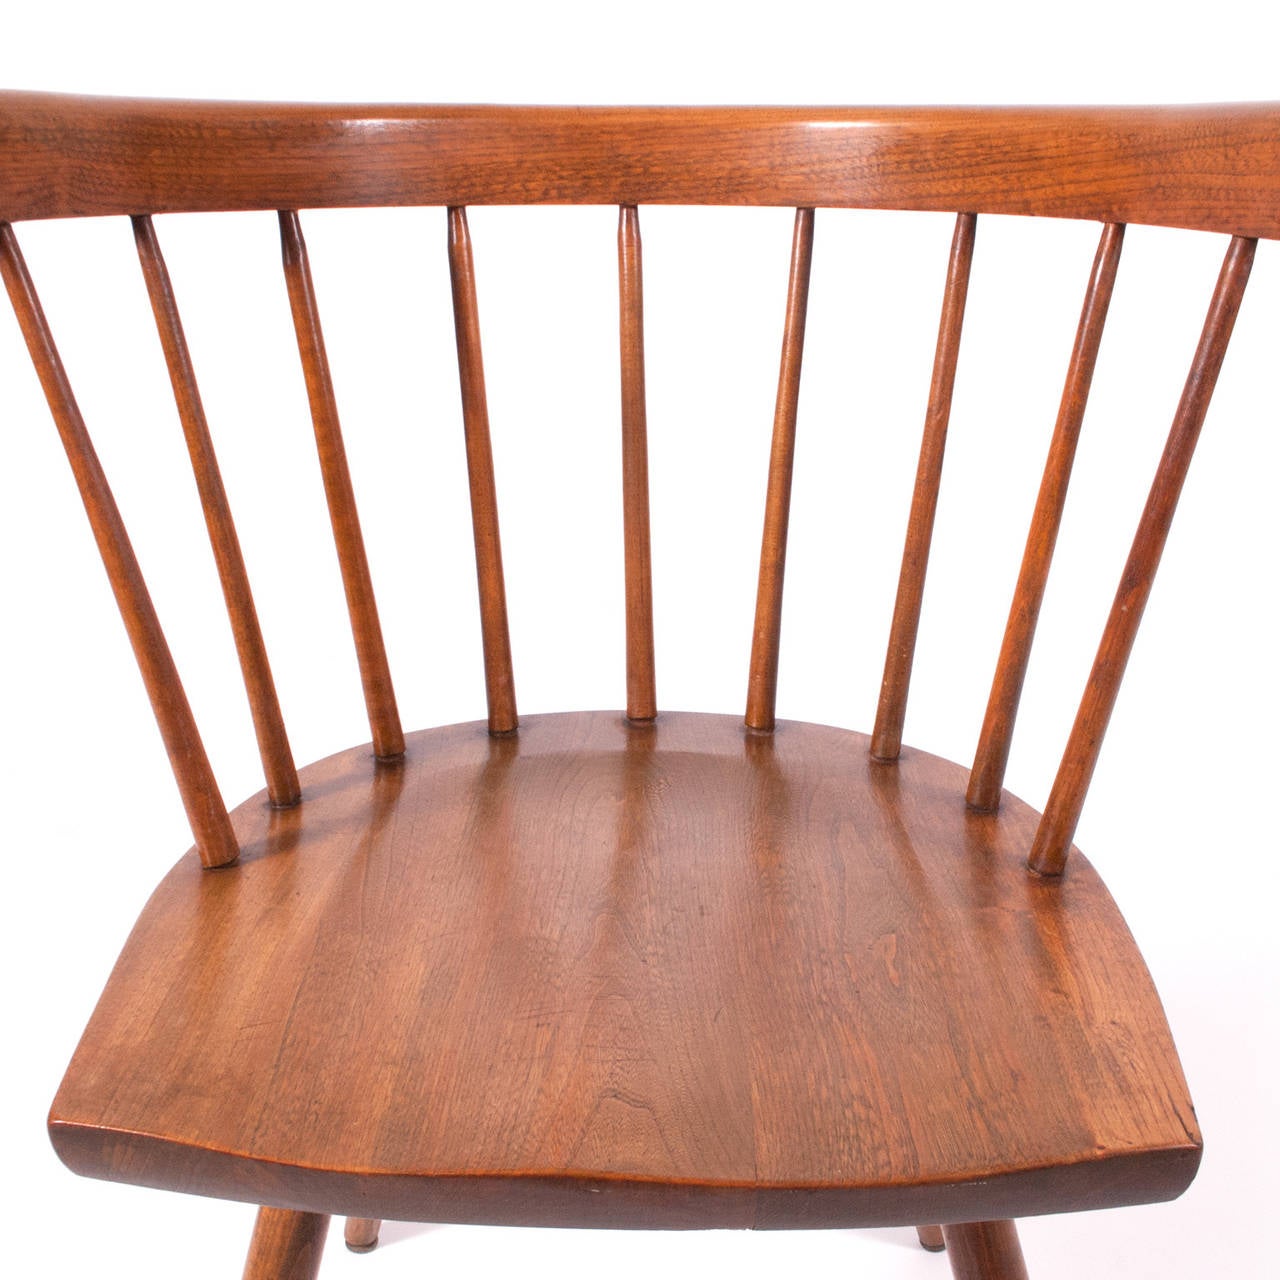 Mid-20th Century Four George Nakashima Attributed Dining Chairs